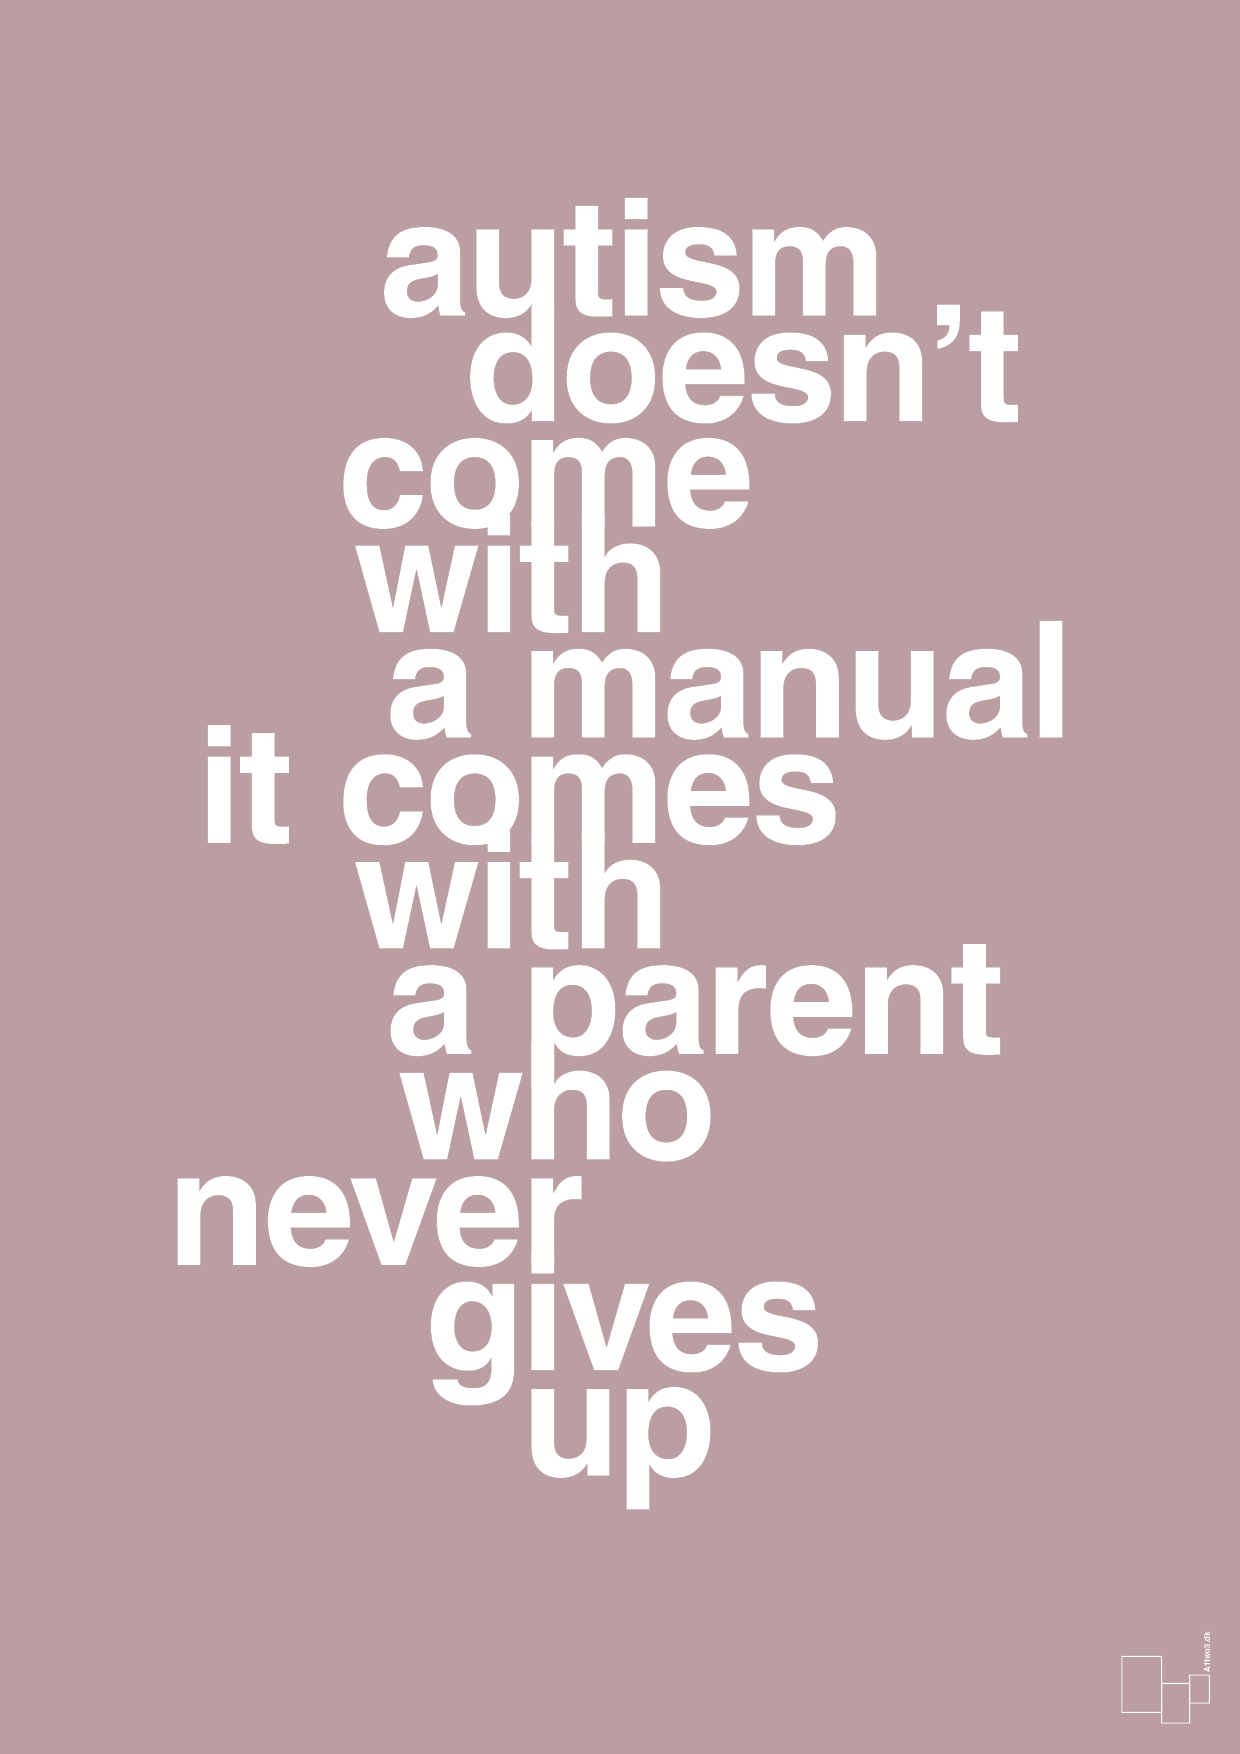 autism doesnt come with a manual it comes with a parent who never gives up - Plakat med Samfund i Light Rose